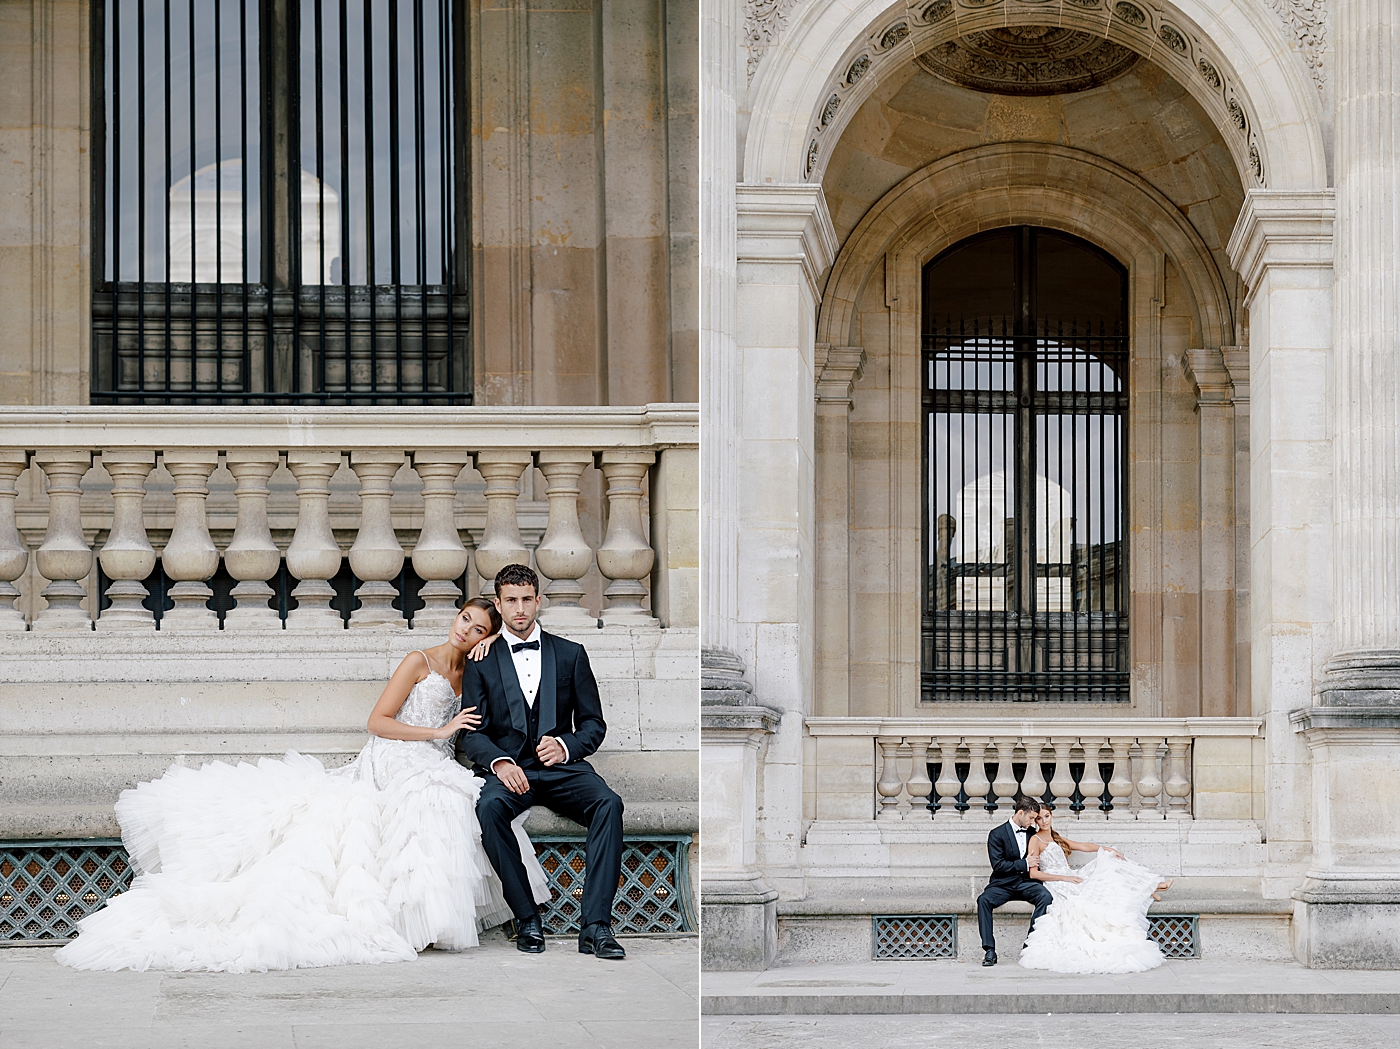 Two side-by-side images of a bride and groom sitting together on a concrete bench | Image by Hope Helmuth Photography